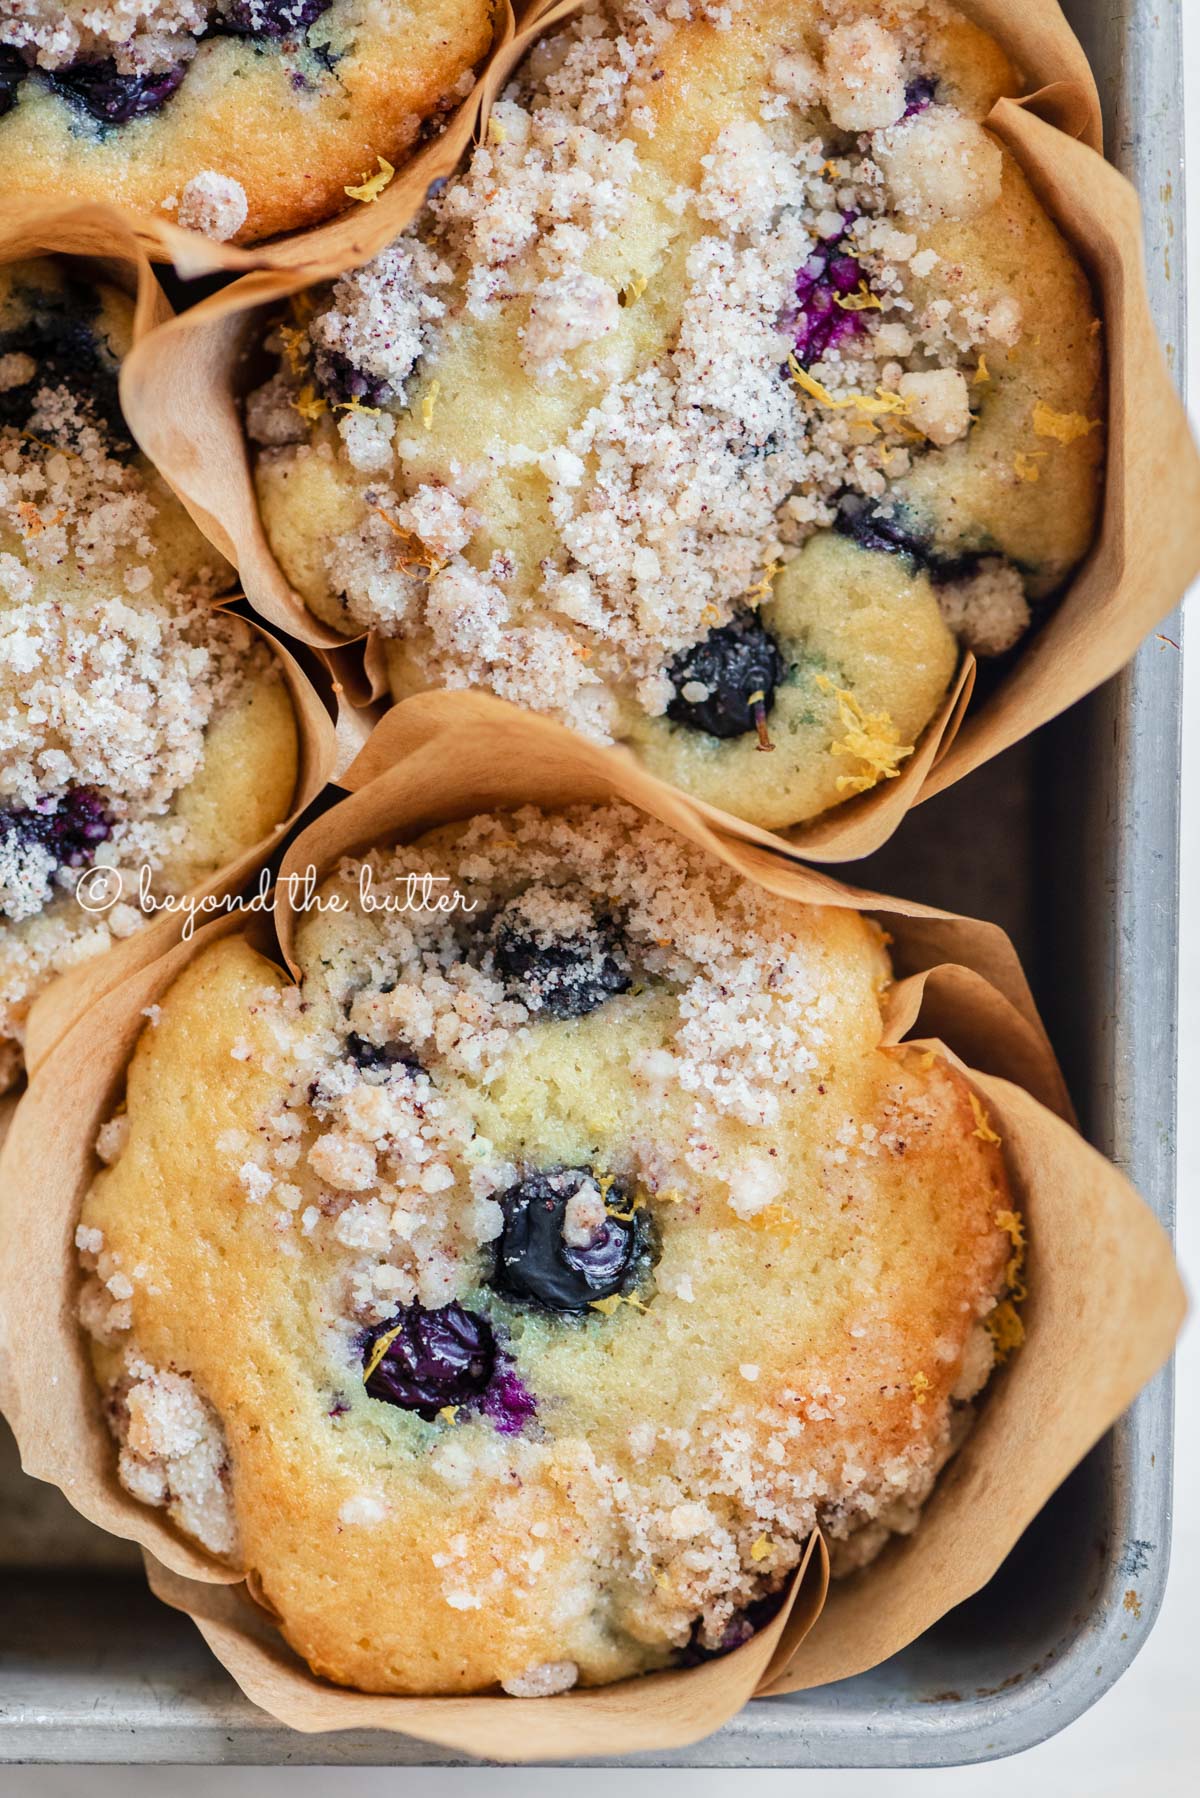 Baking tray filled with bakery style lemon blueberry muffins garnished with slices of lemons and blueberries | All images © Beyond the Butter®